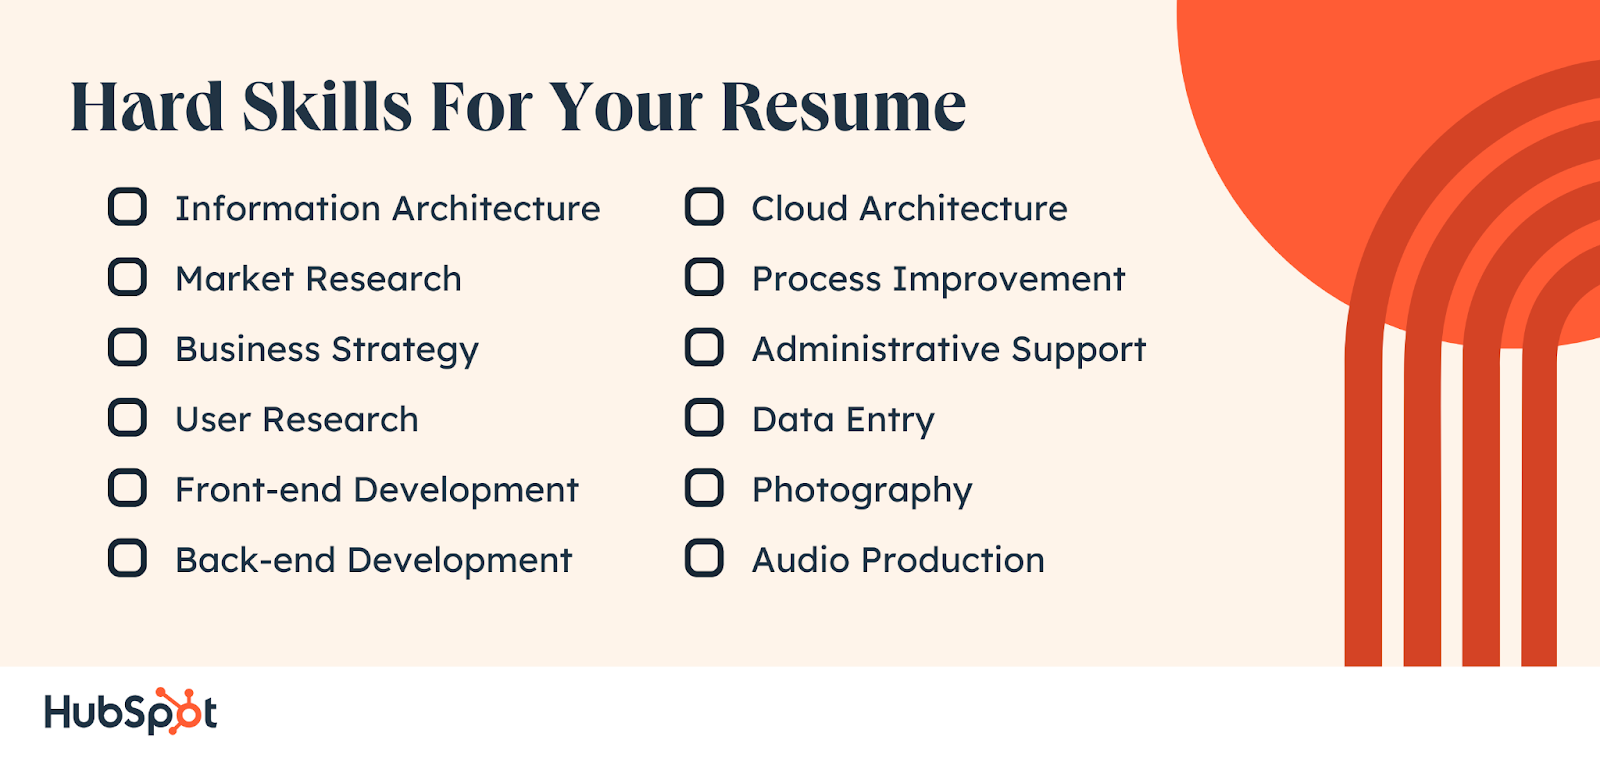 Hard Skills For Your Resume. Information Architecture. Market Research. Business Strategy. User Research. Front-end Development. Back-end Development. Data Entry. Photography. Audio Production. Cloud Architecture. Process Improvement. Administrative Support.